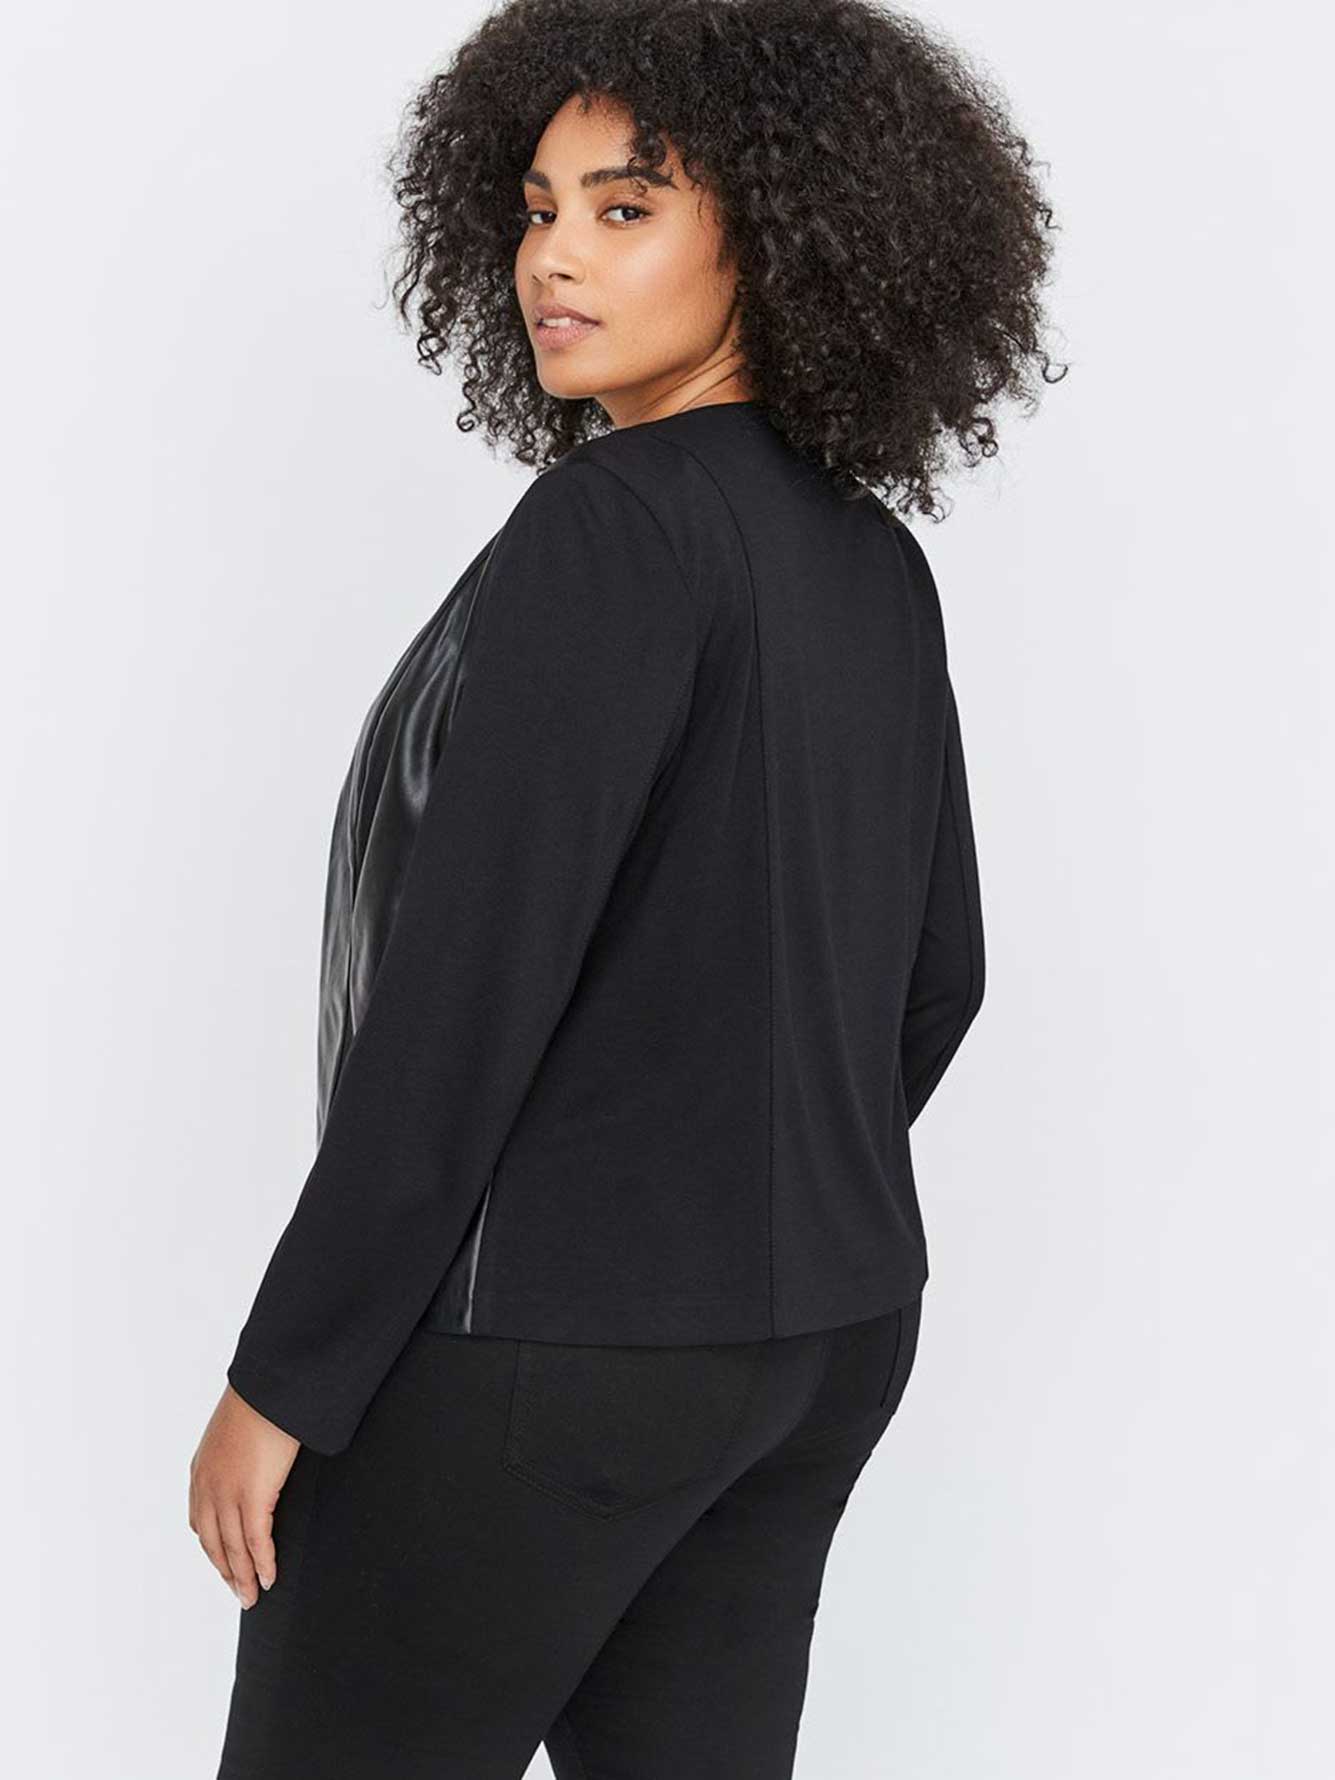 Fitted Mixed Fabric Jacket - Michel Studio | Penningtons